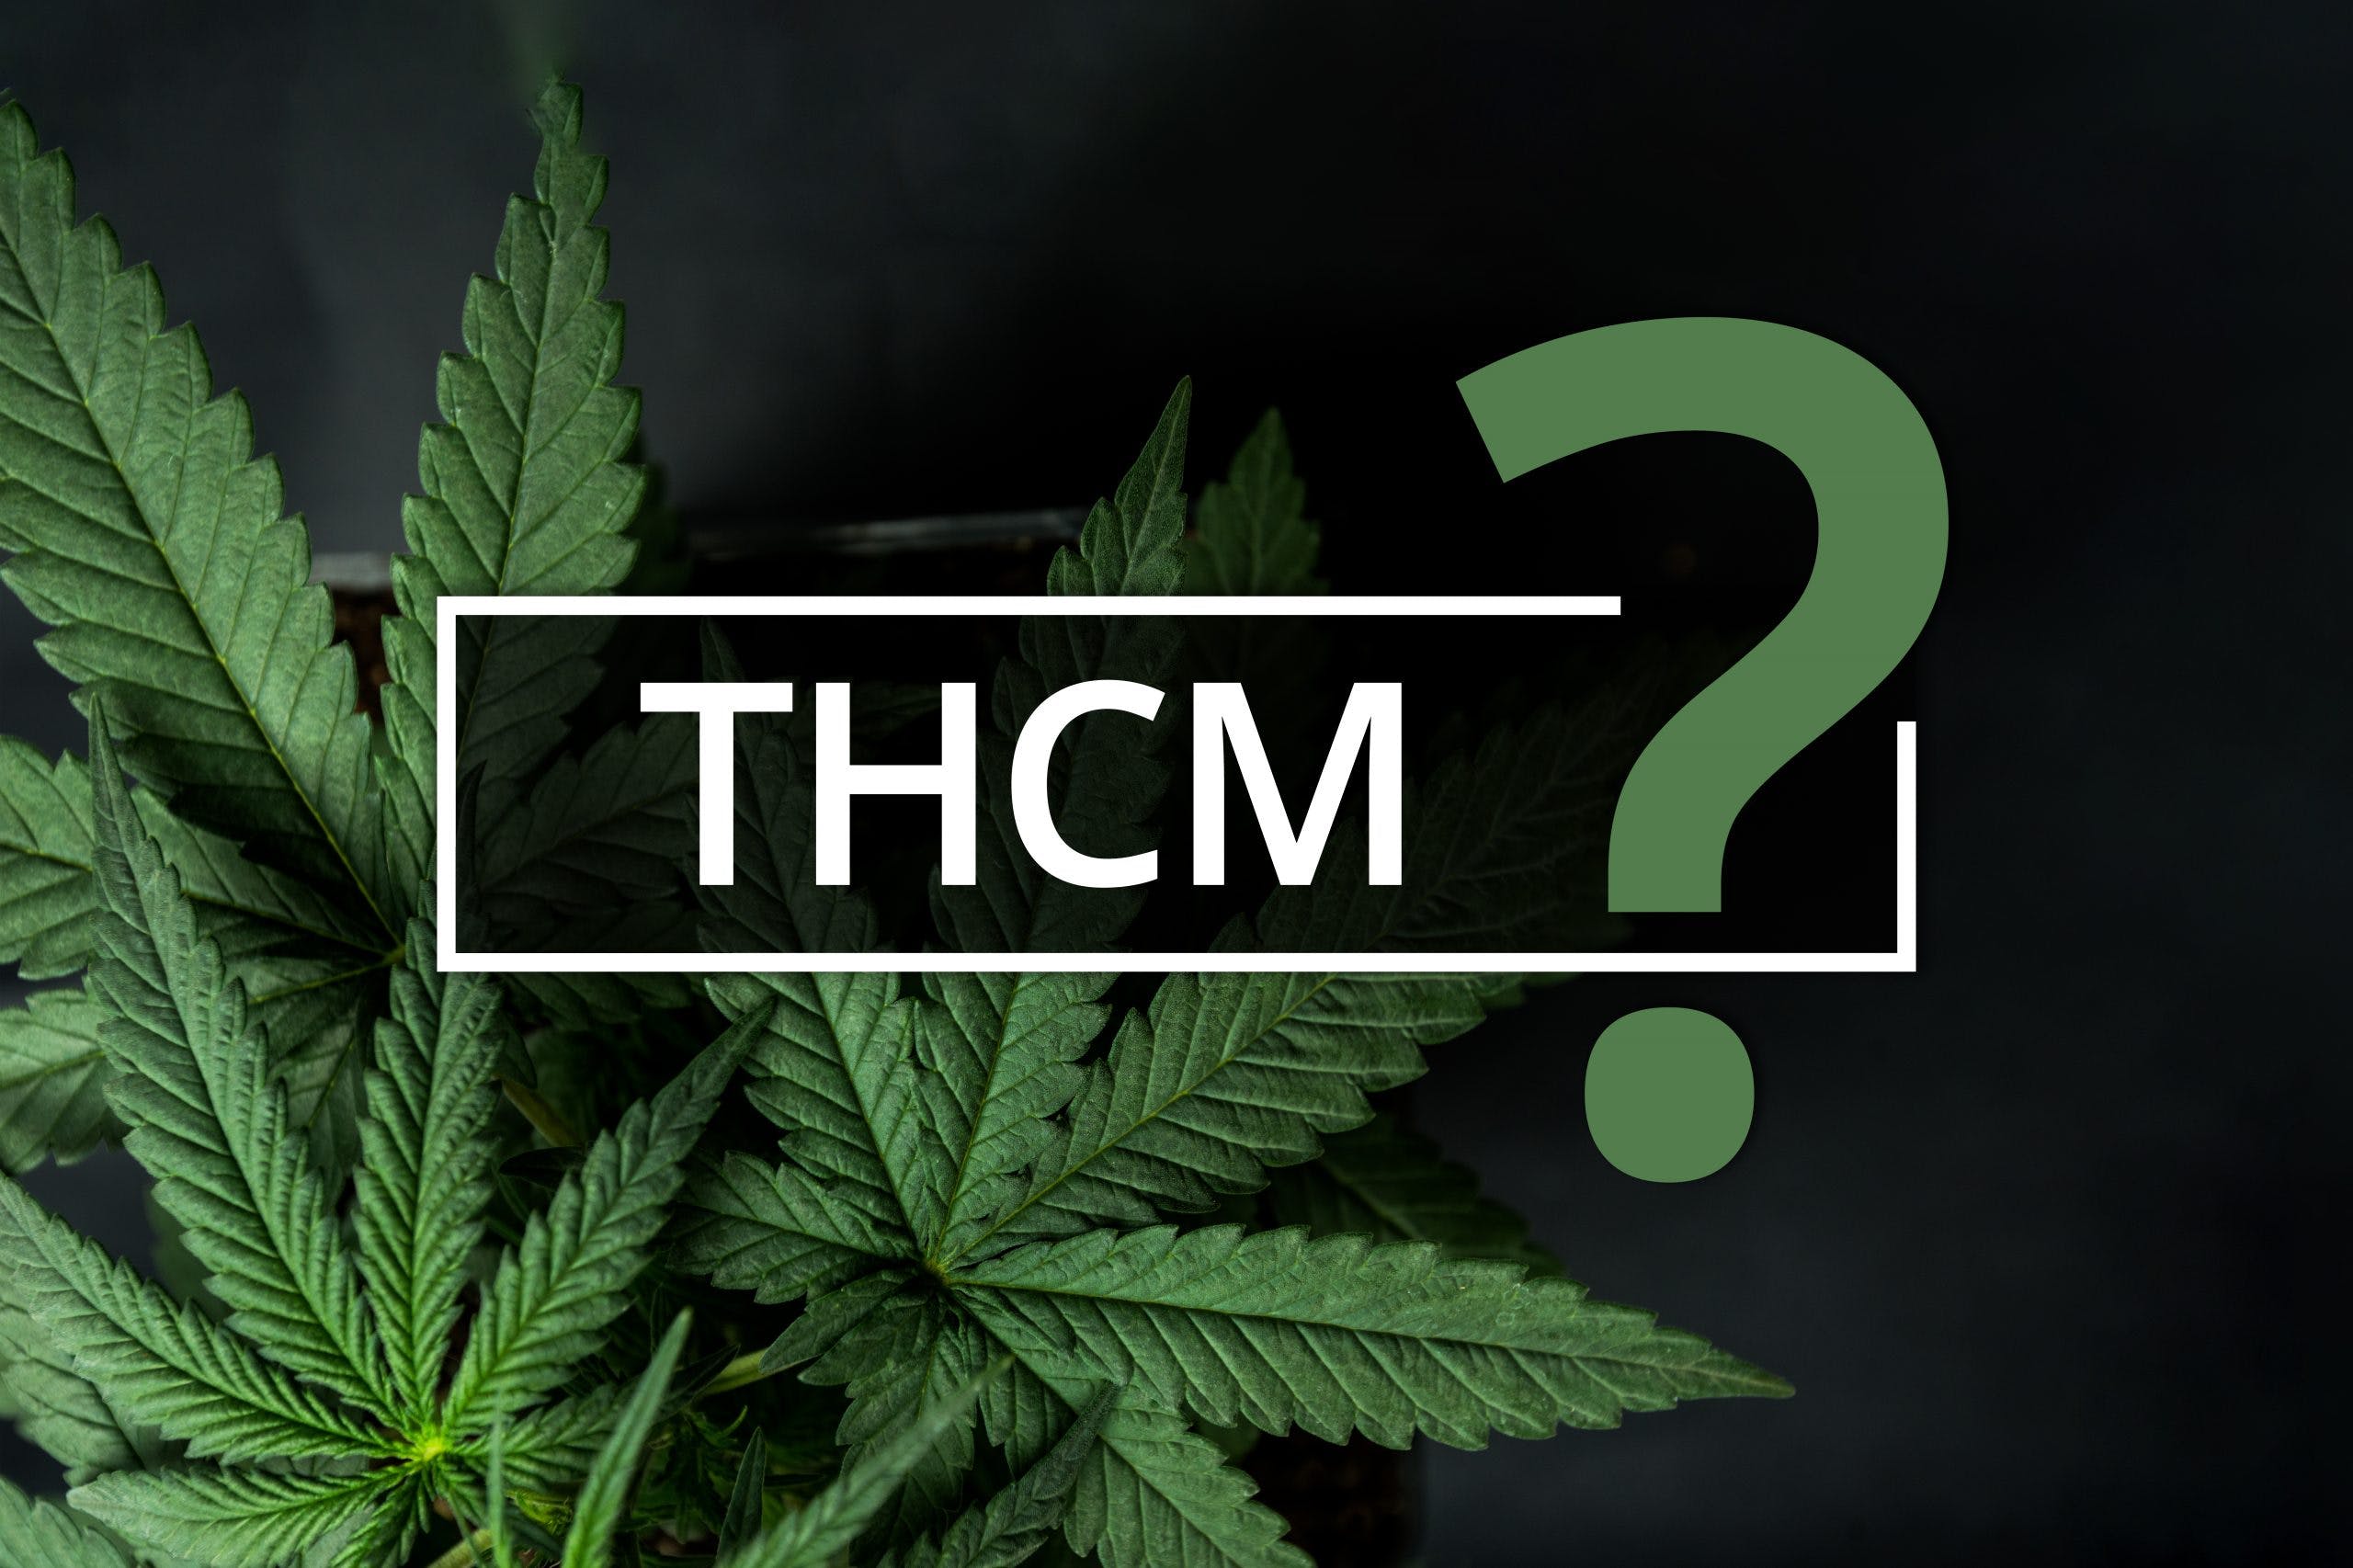 THCM: What Is It and Where Does It Come From?